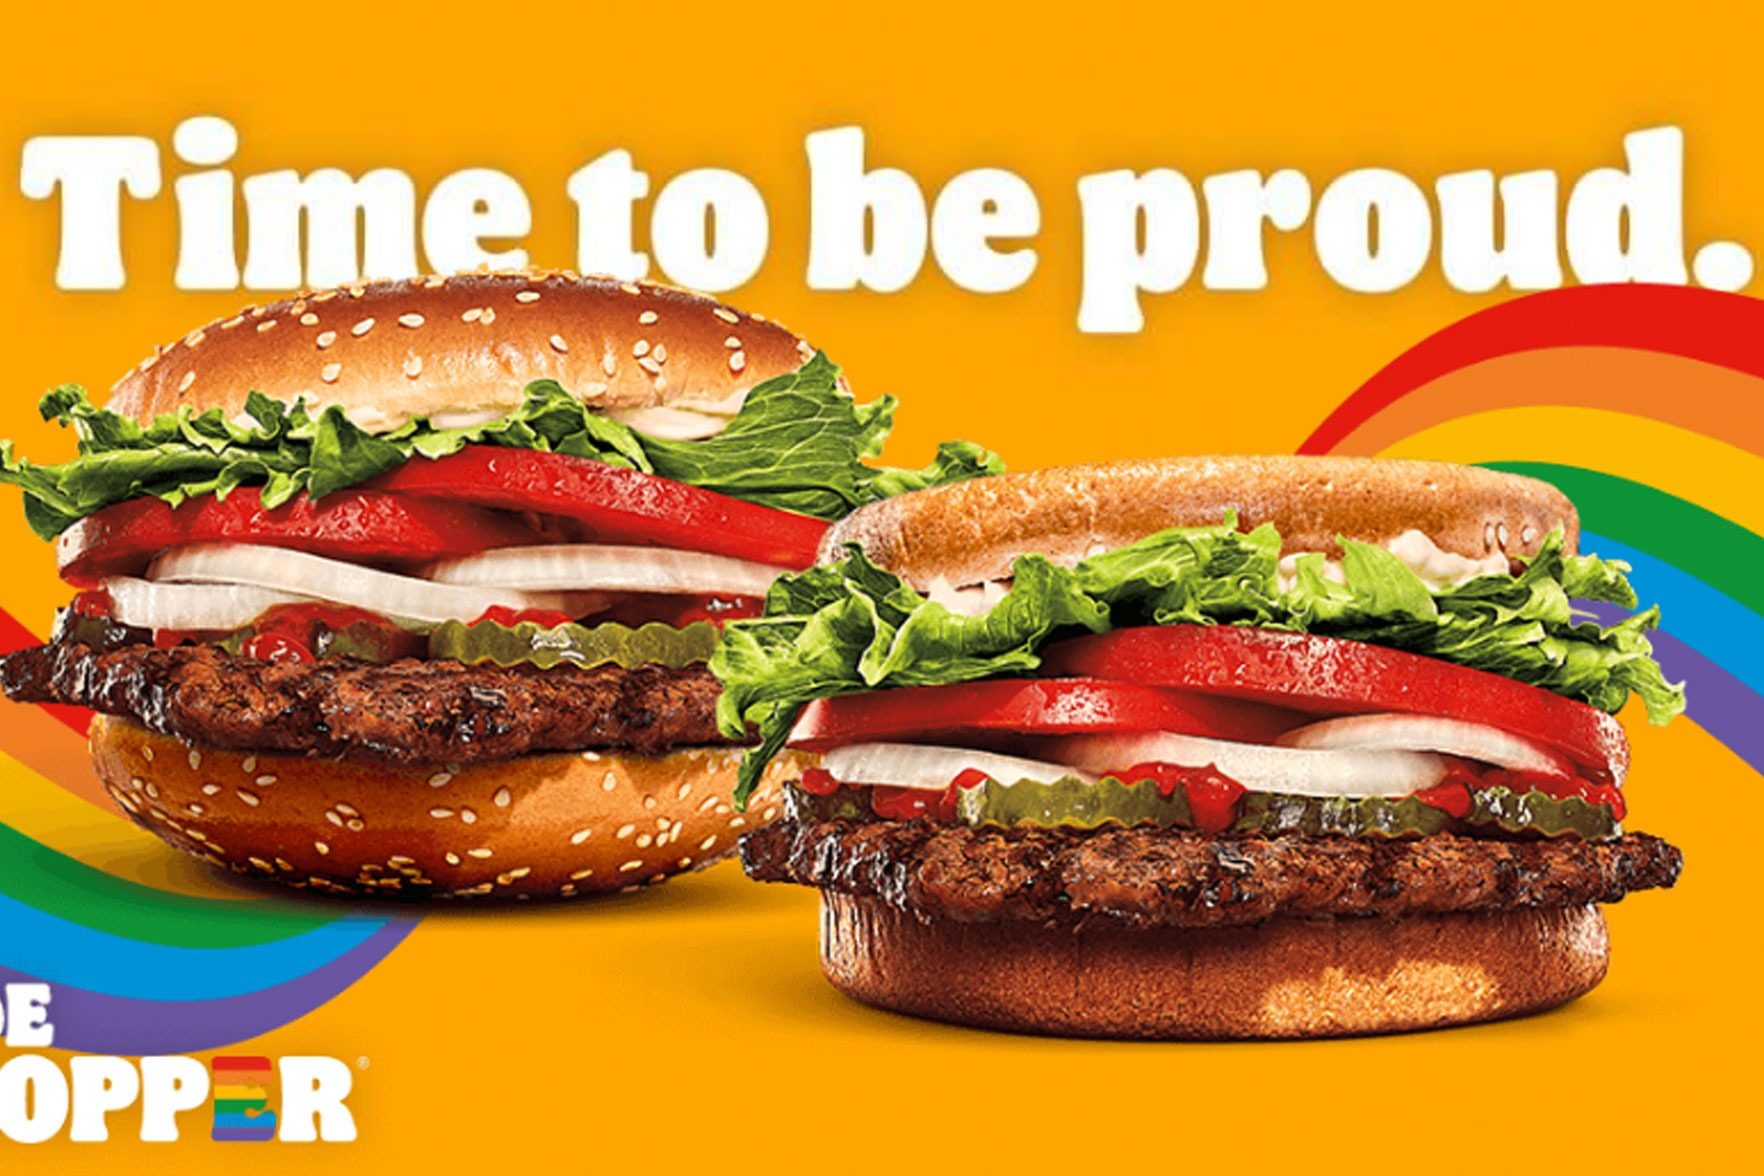 Burger King Made a Whopper With Same-Sex Buns for Pride Month image